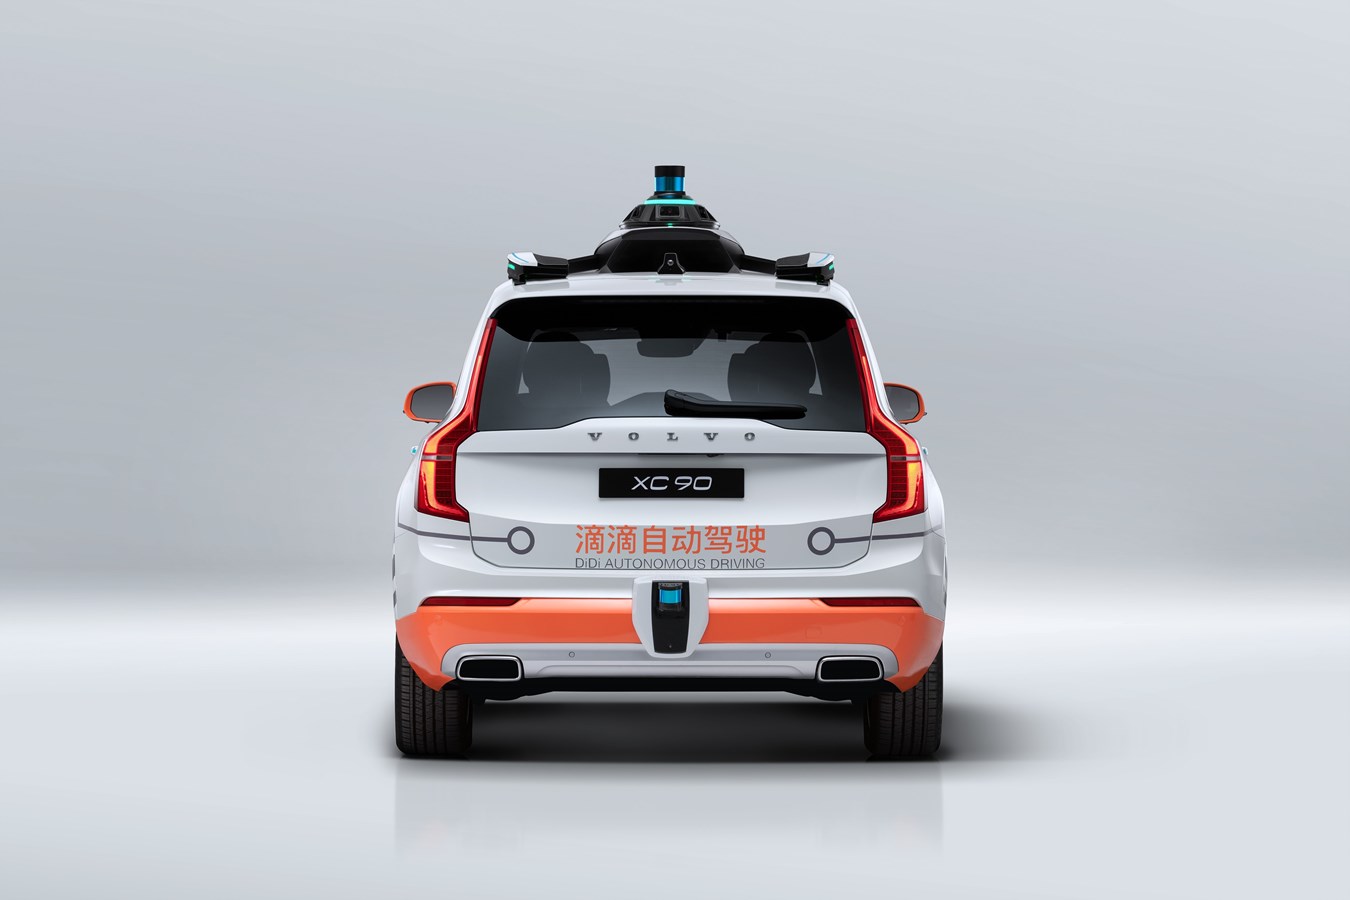 Volvo Cars teams up with world’s leading mobility technology platform DiDi for self-driving test fleet